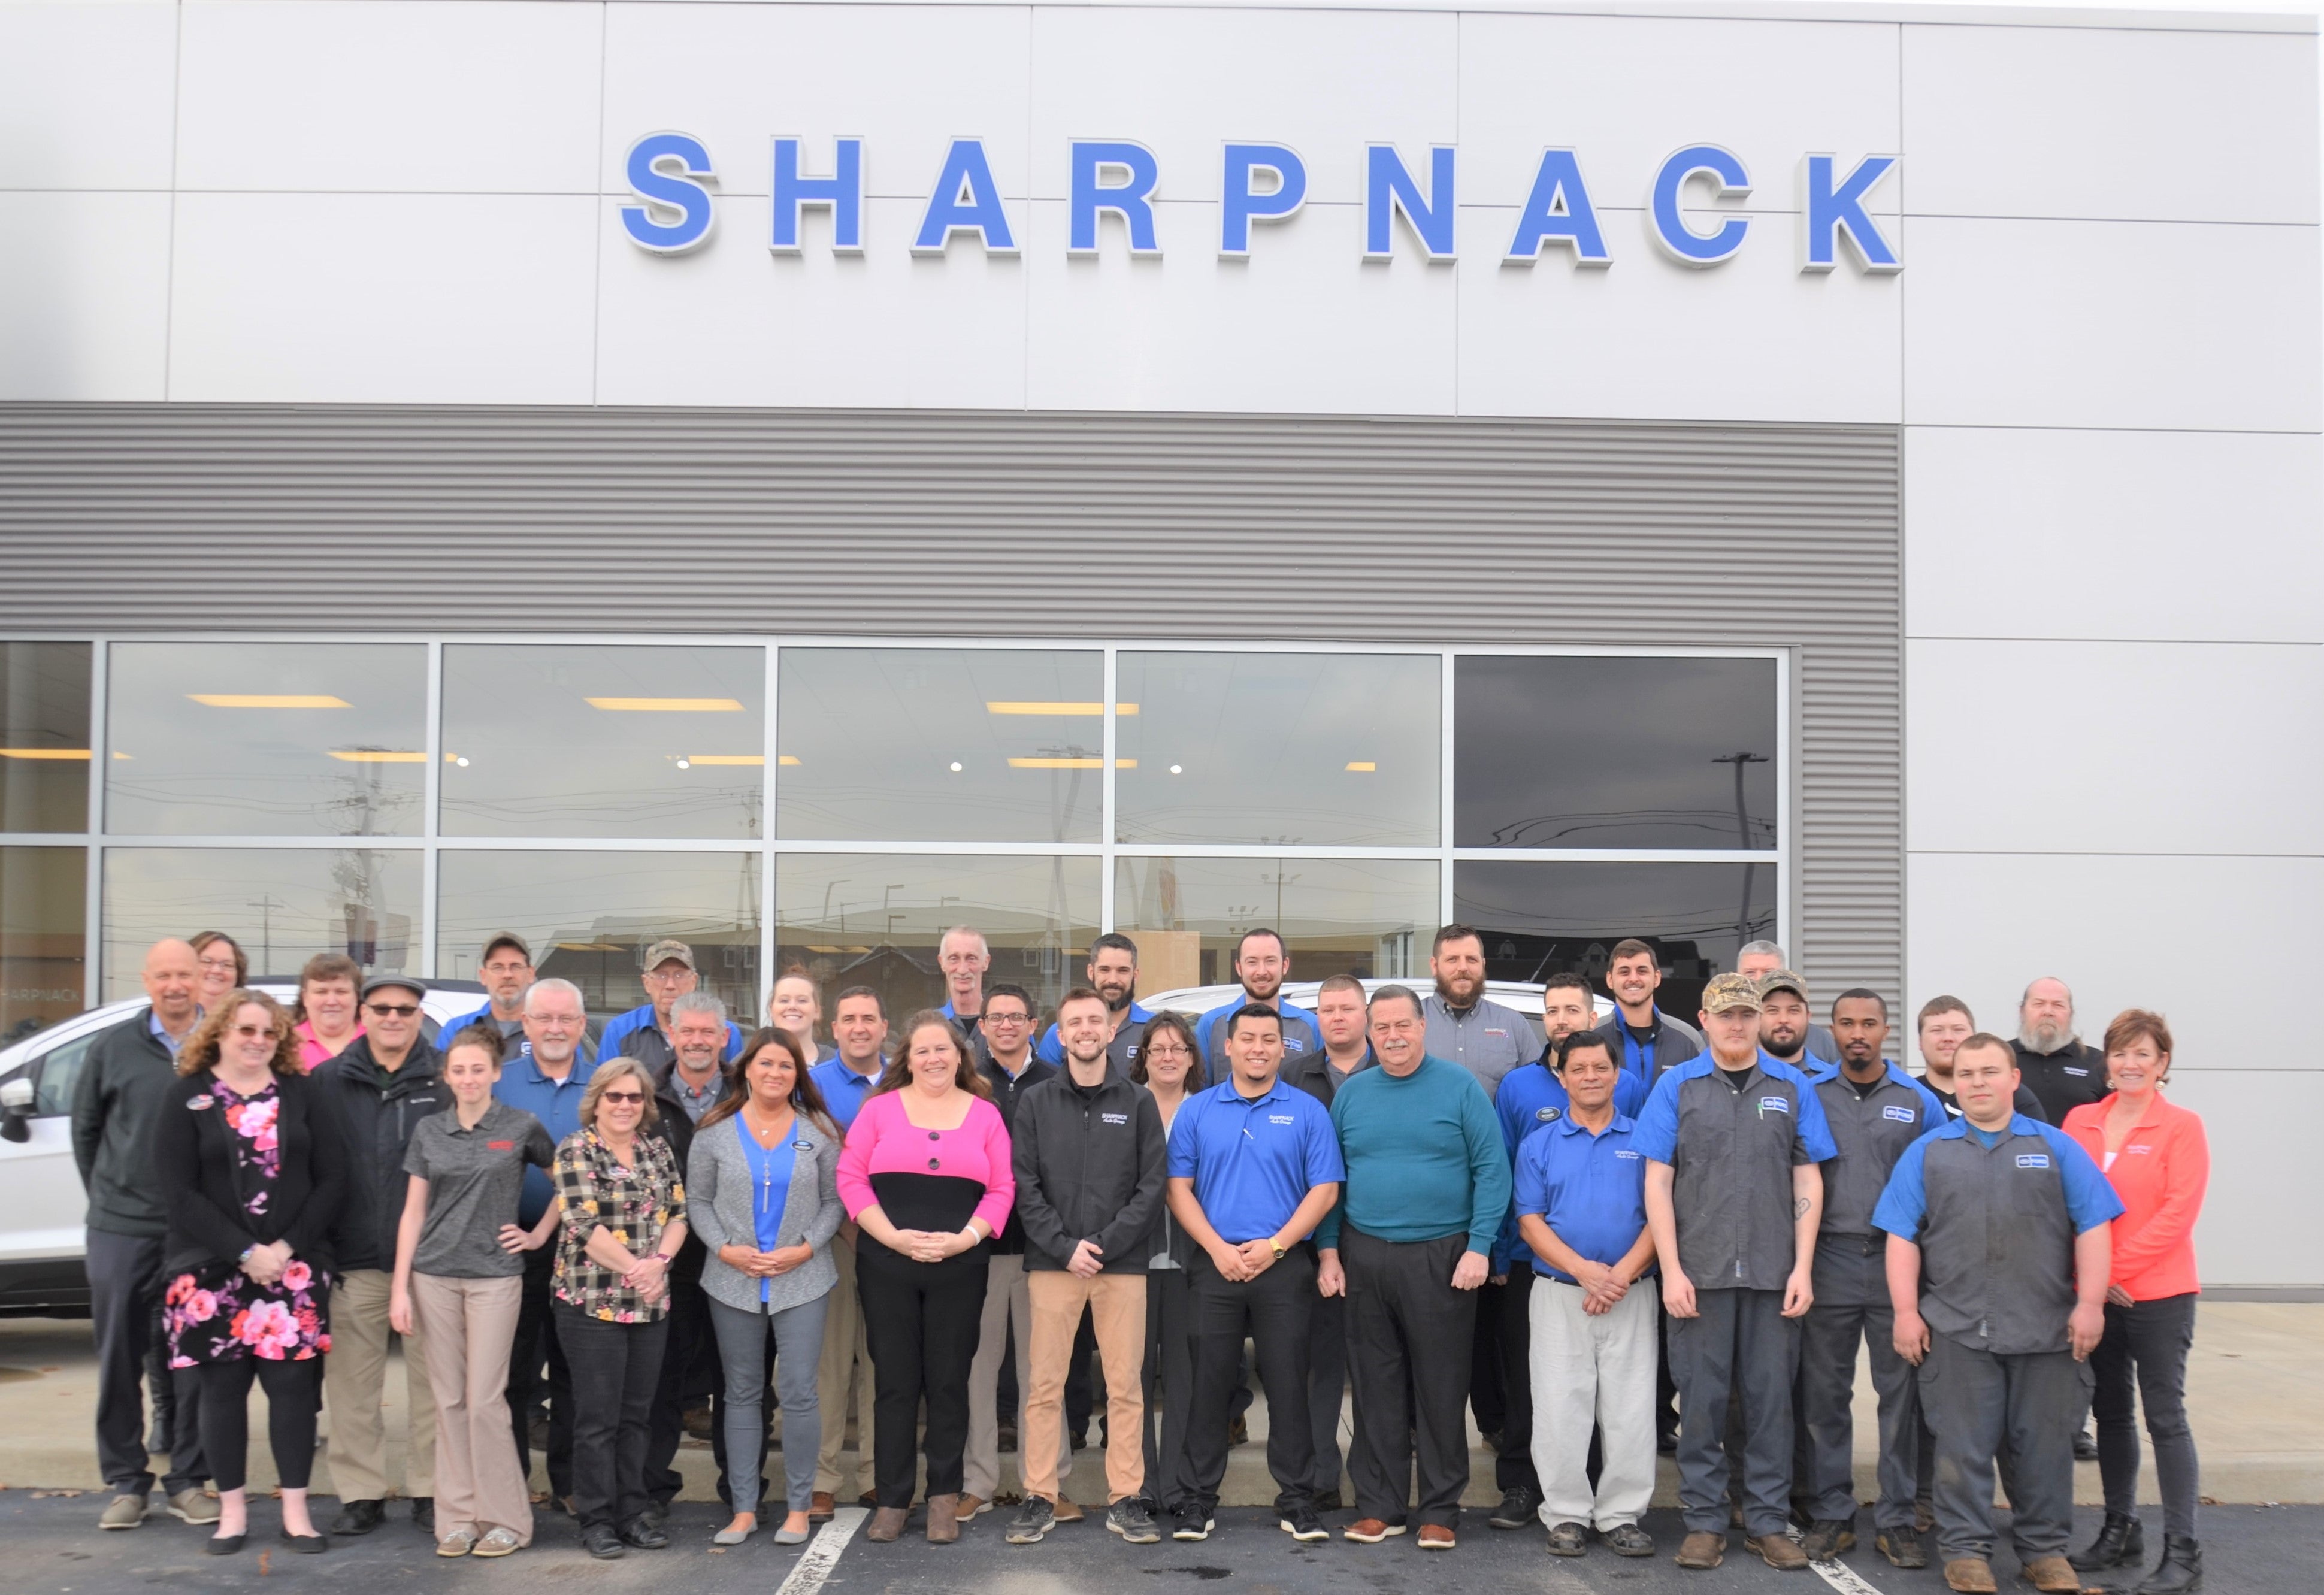 About Sharpnack Ford